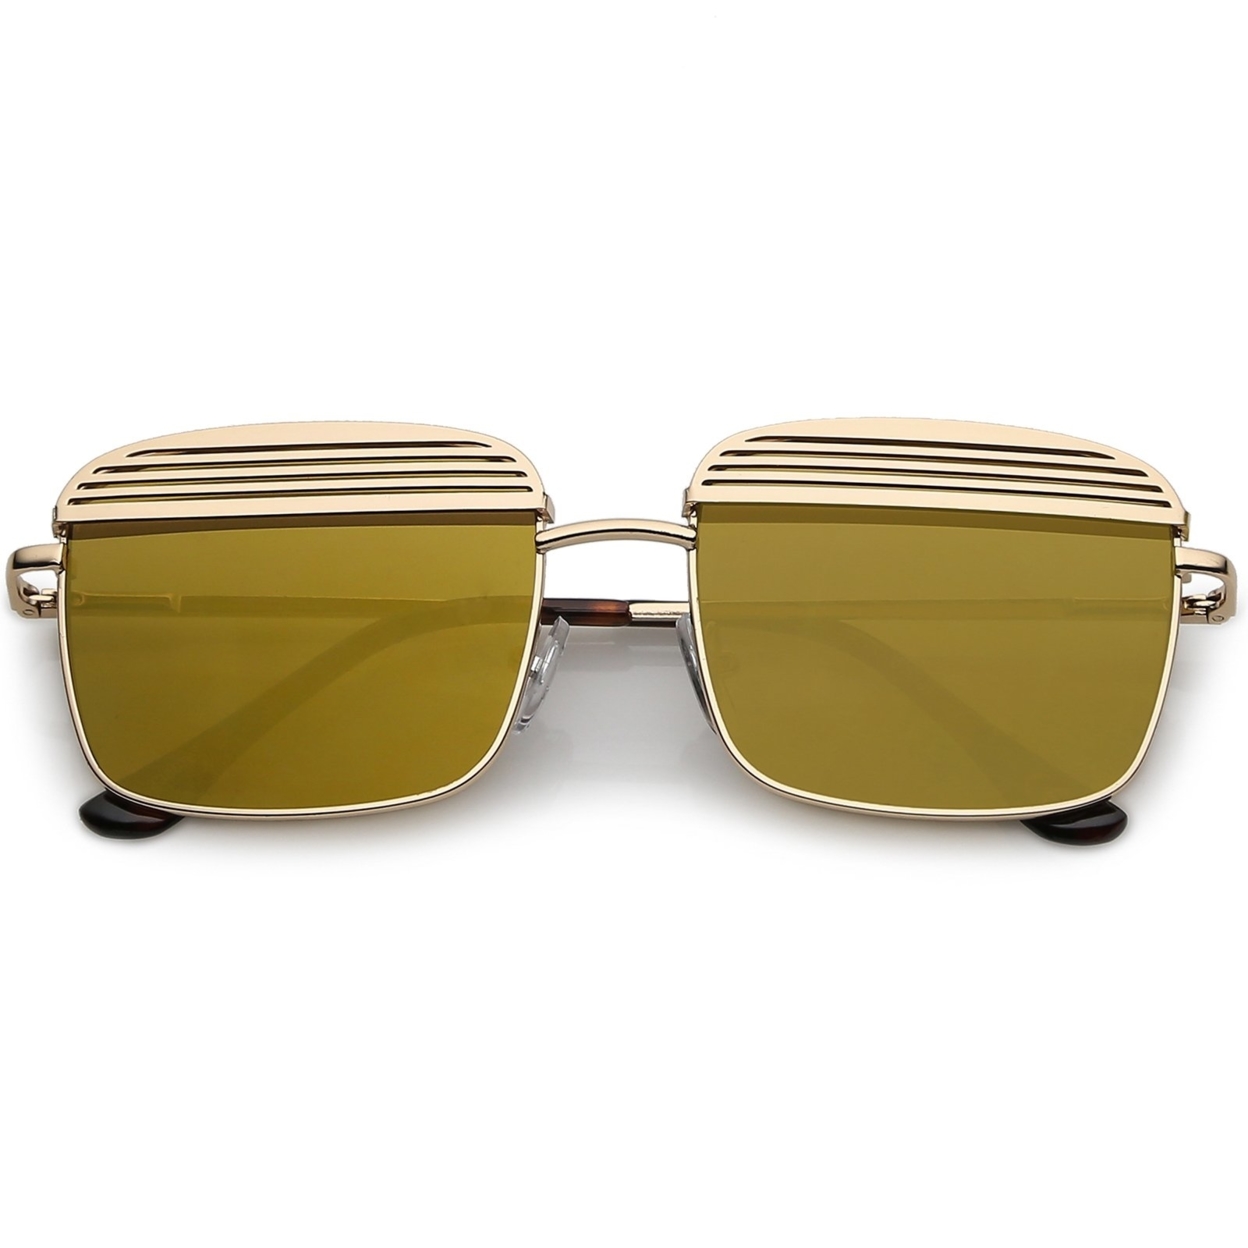 Modern Square Sunglasses With Ultra Slim Arms And Metal Covered Mirror Flat Lens 53mm - Shiny Gold / Gold Mirror